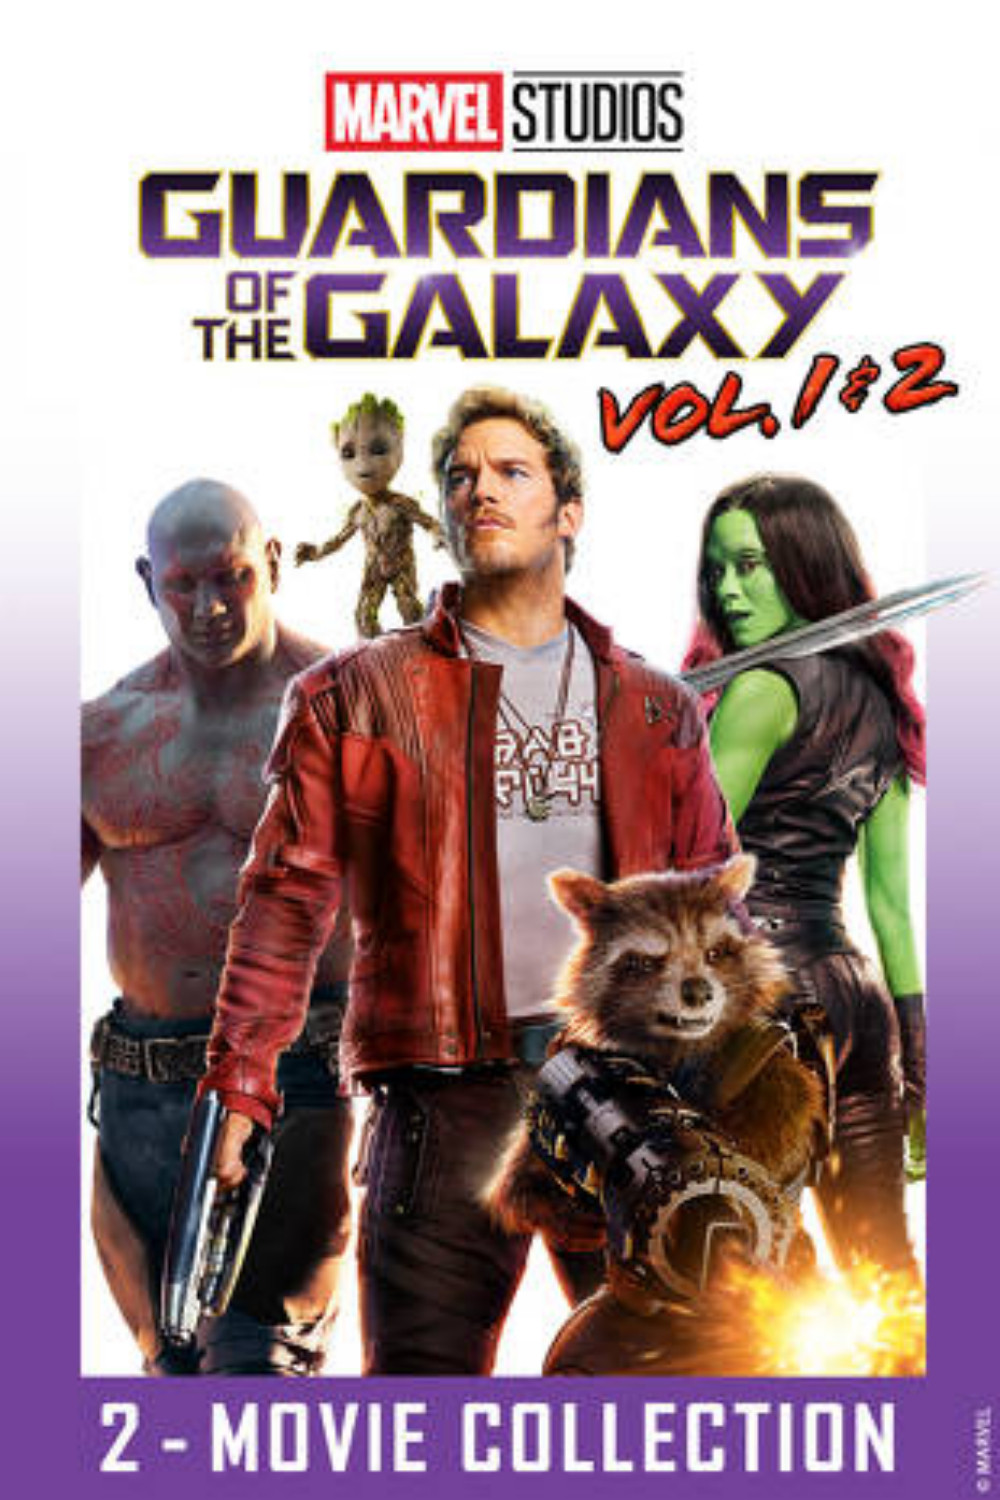 Guardians Of The Galaxy Collection Plex Collection Posters